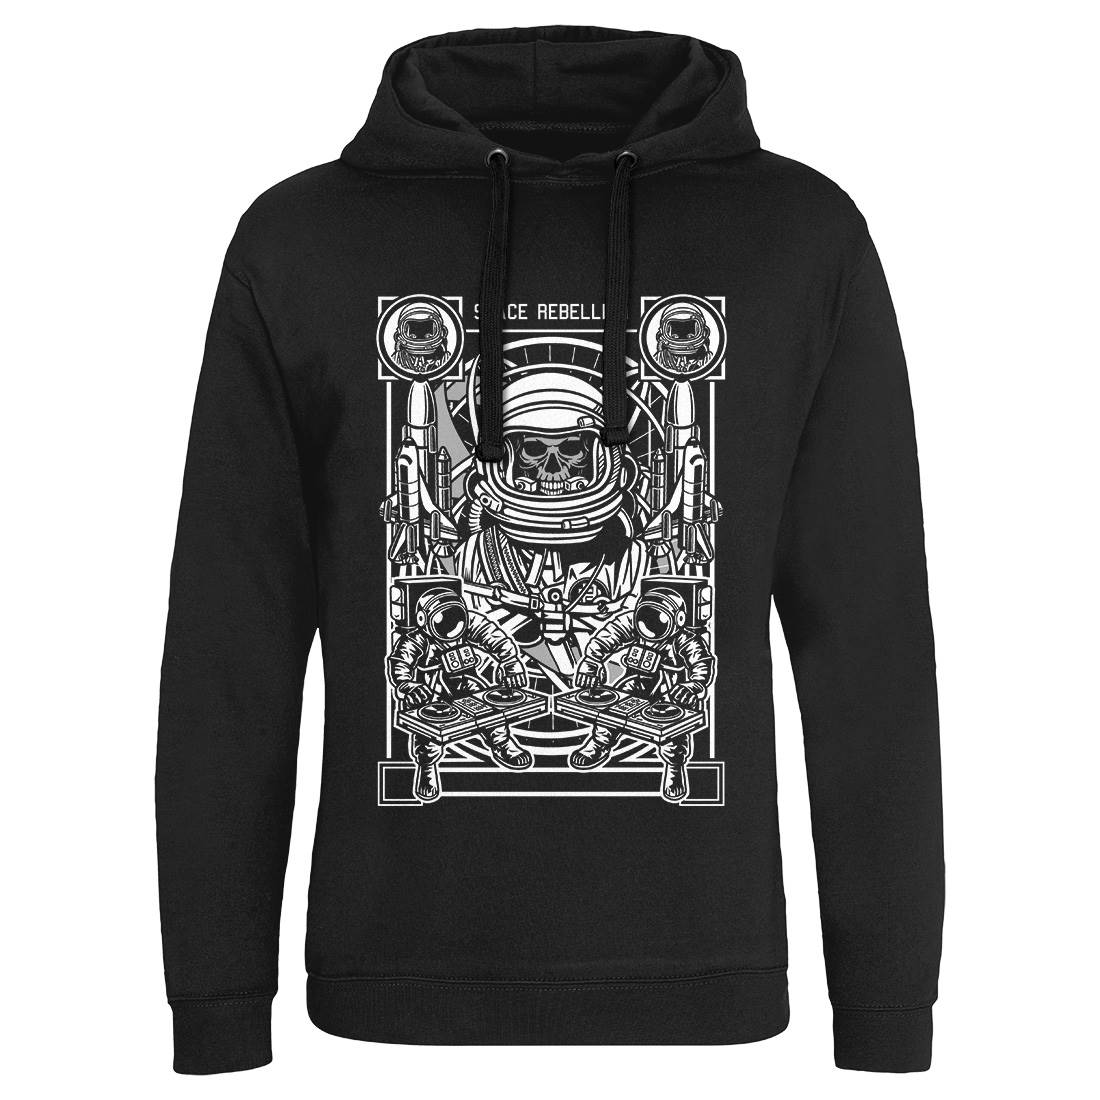 Astronaut Rebellion Mens Hoodie Without Pocket Space D582